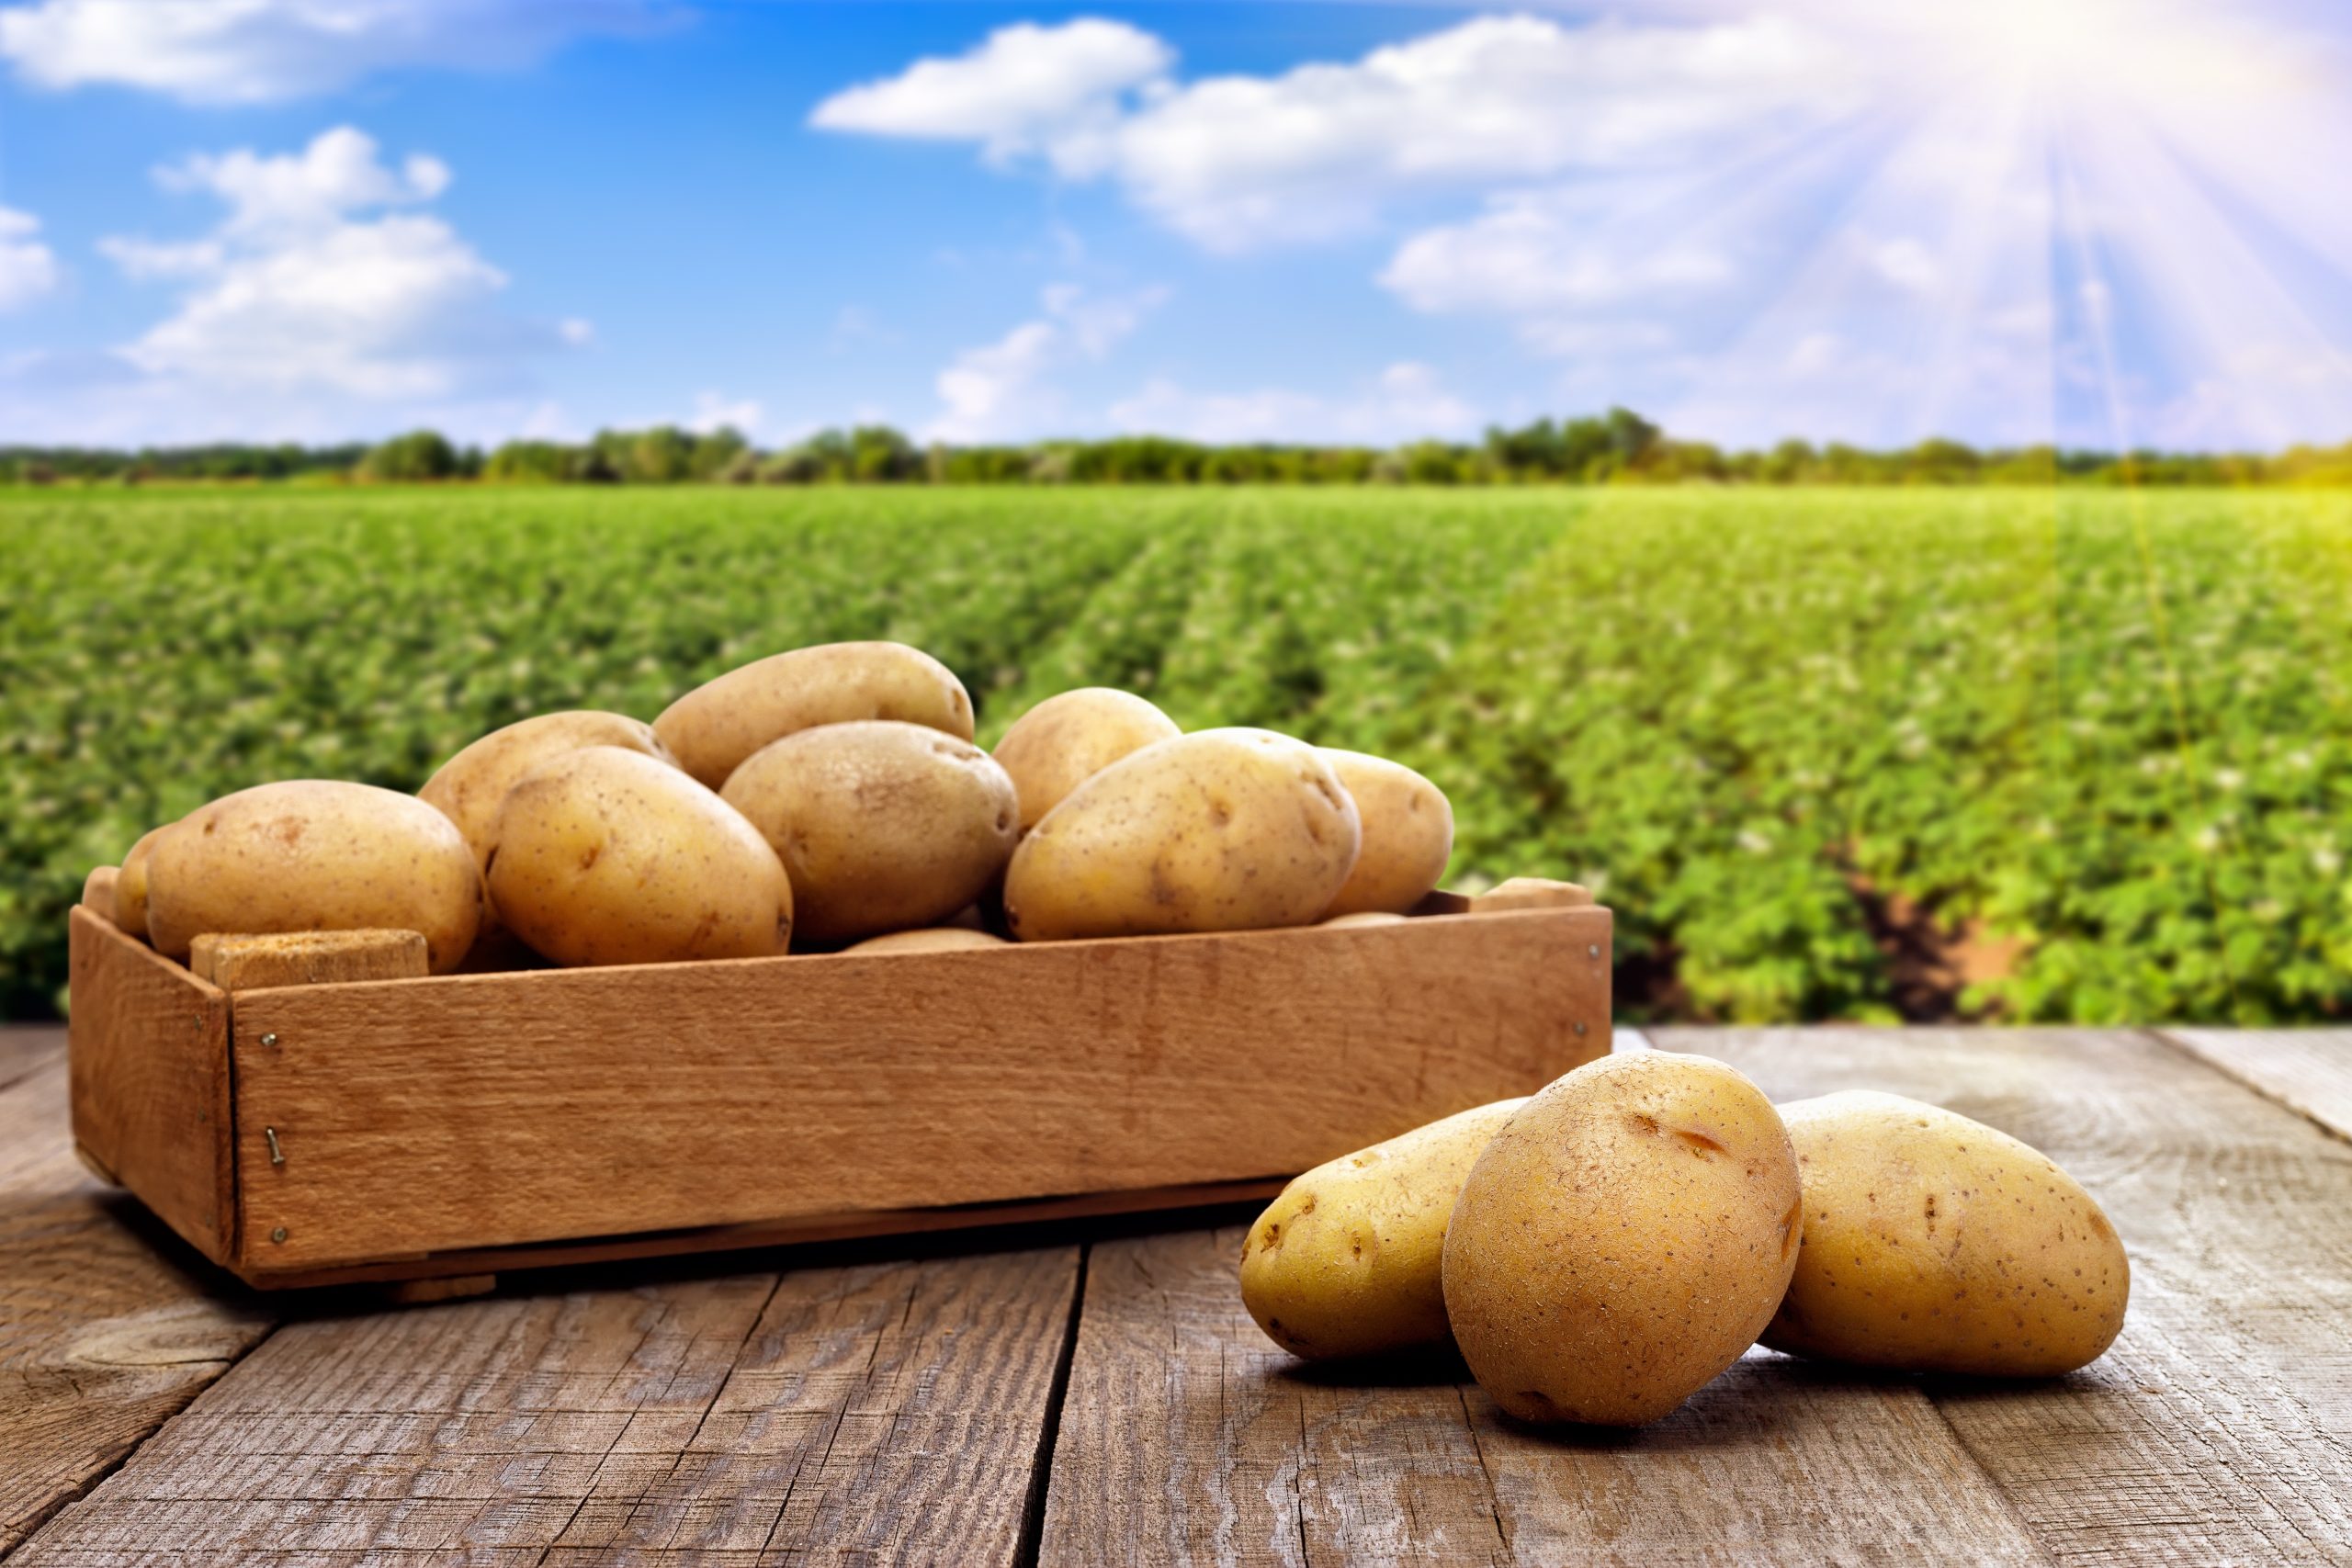 Potatoes,In,Wooden,Crate,On,Table,With,Green,Field,On